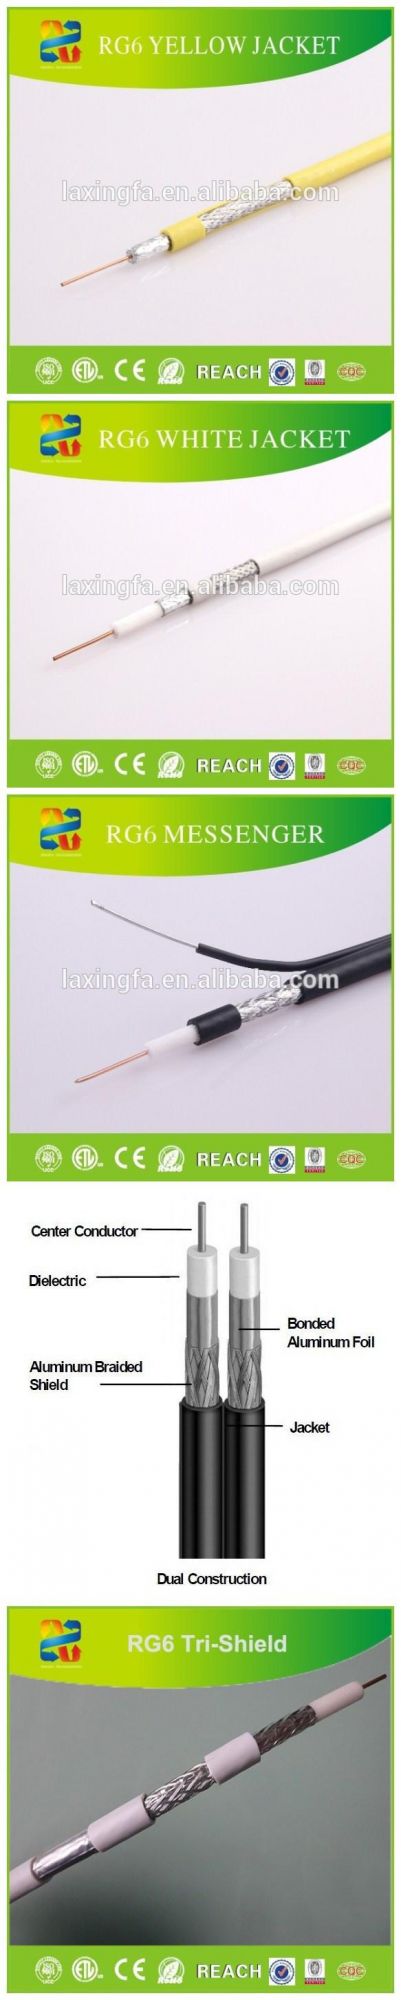 18 Years Manufacturer Produce Coaxial Cable RG6 with Messenger